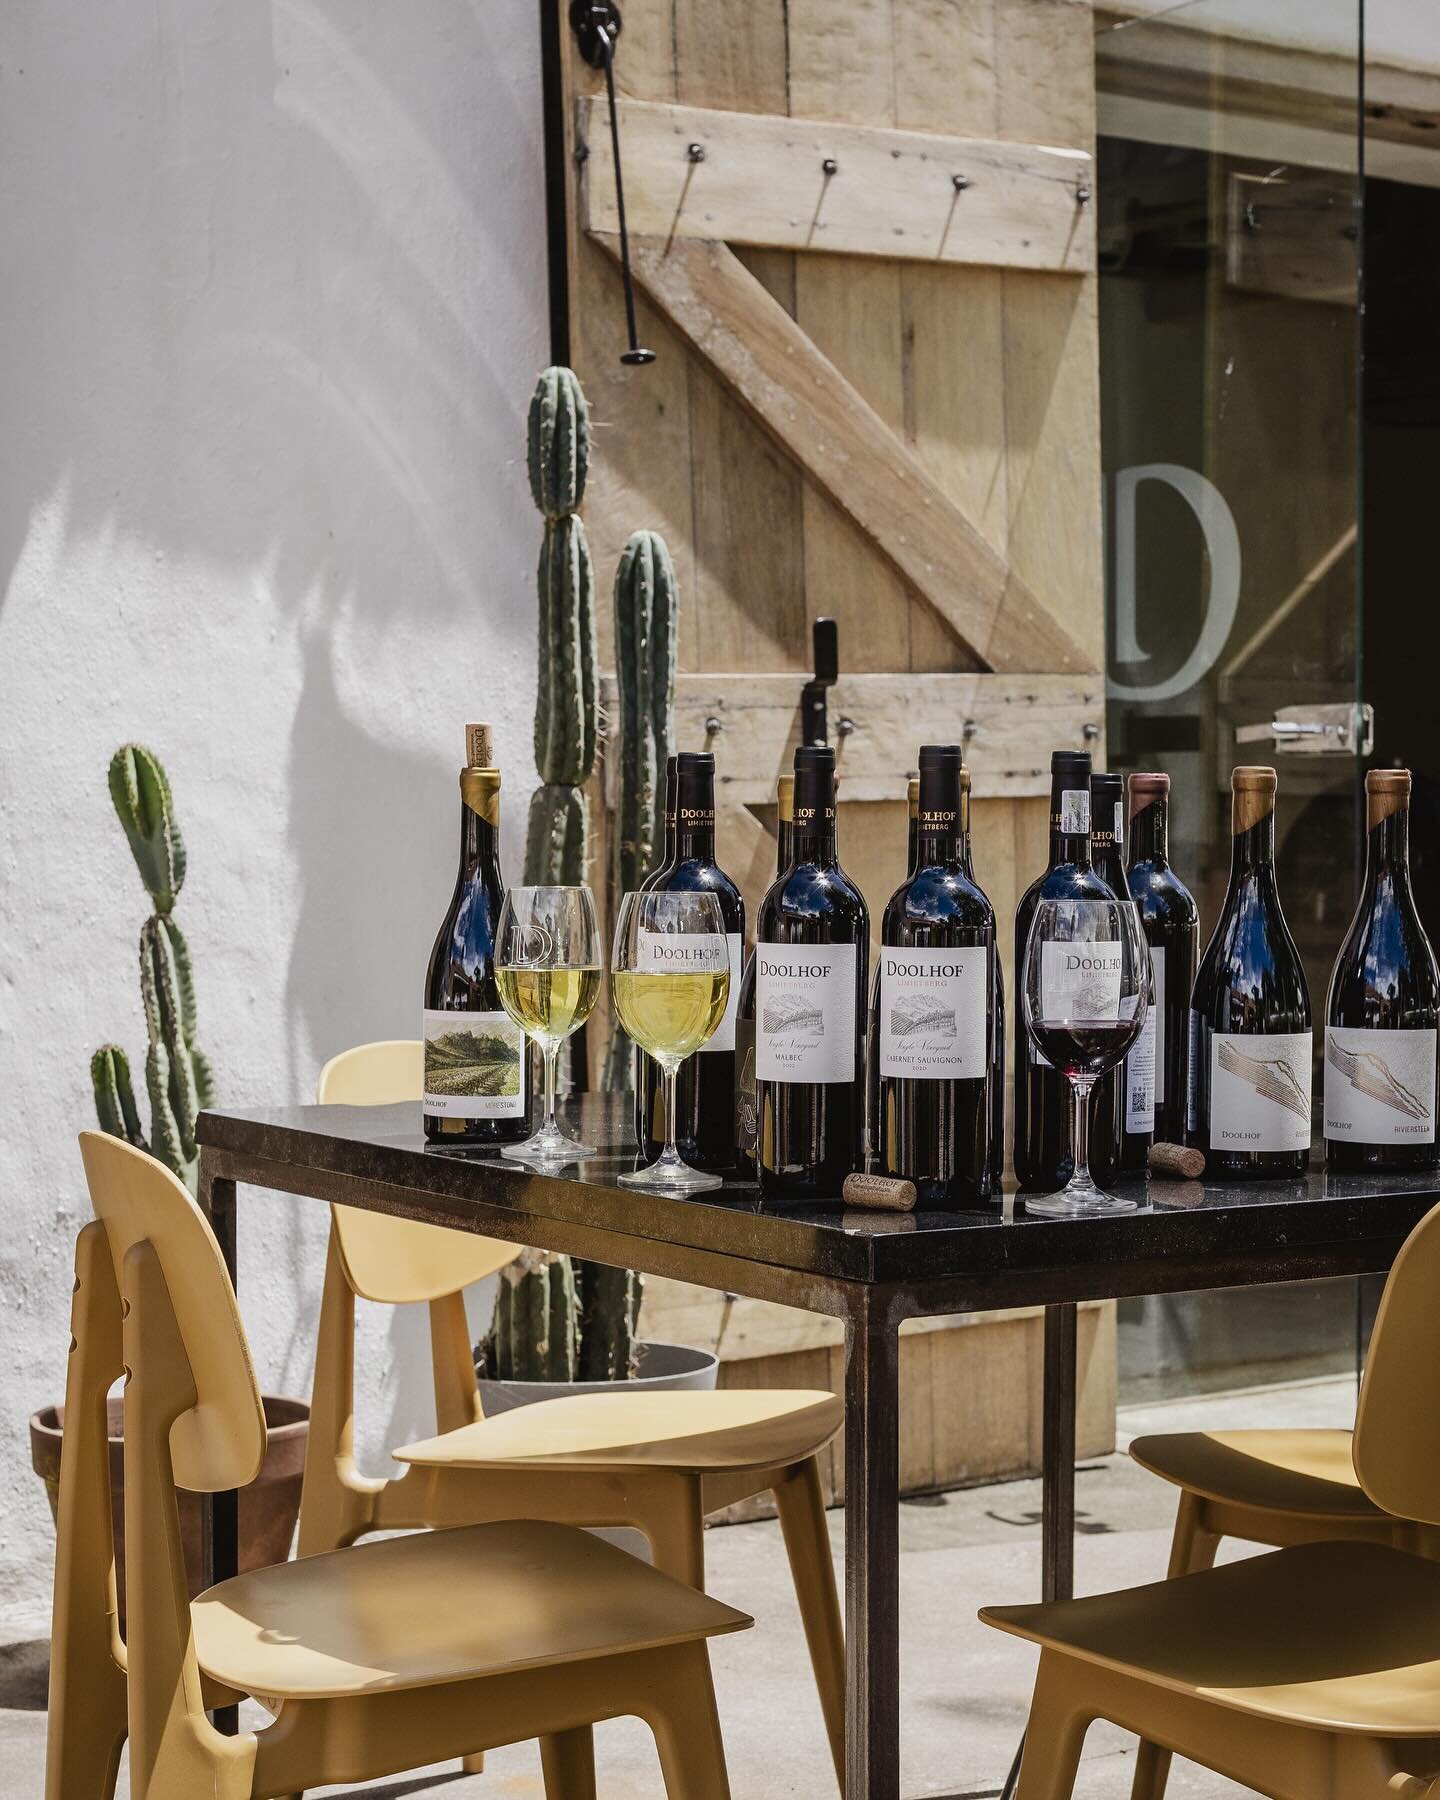 Have you tasted the Doolhof Single Vineyard wines yet ? Which one is your favourite ?🍷

Come join us at Mila for a all wine &bull; all food experience!

#milarestaurant #milarestaurants #milarestaurantatdoolhof #capetownrestaurants #capetownfoodie #